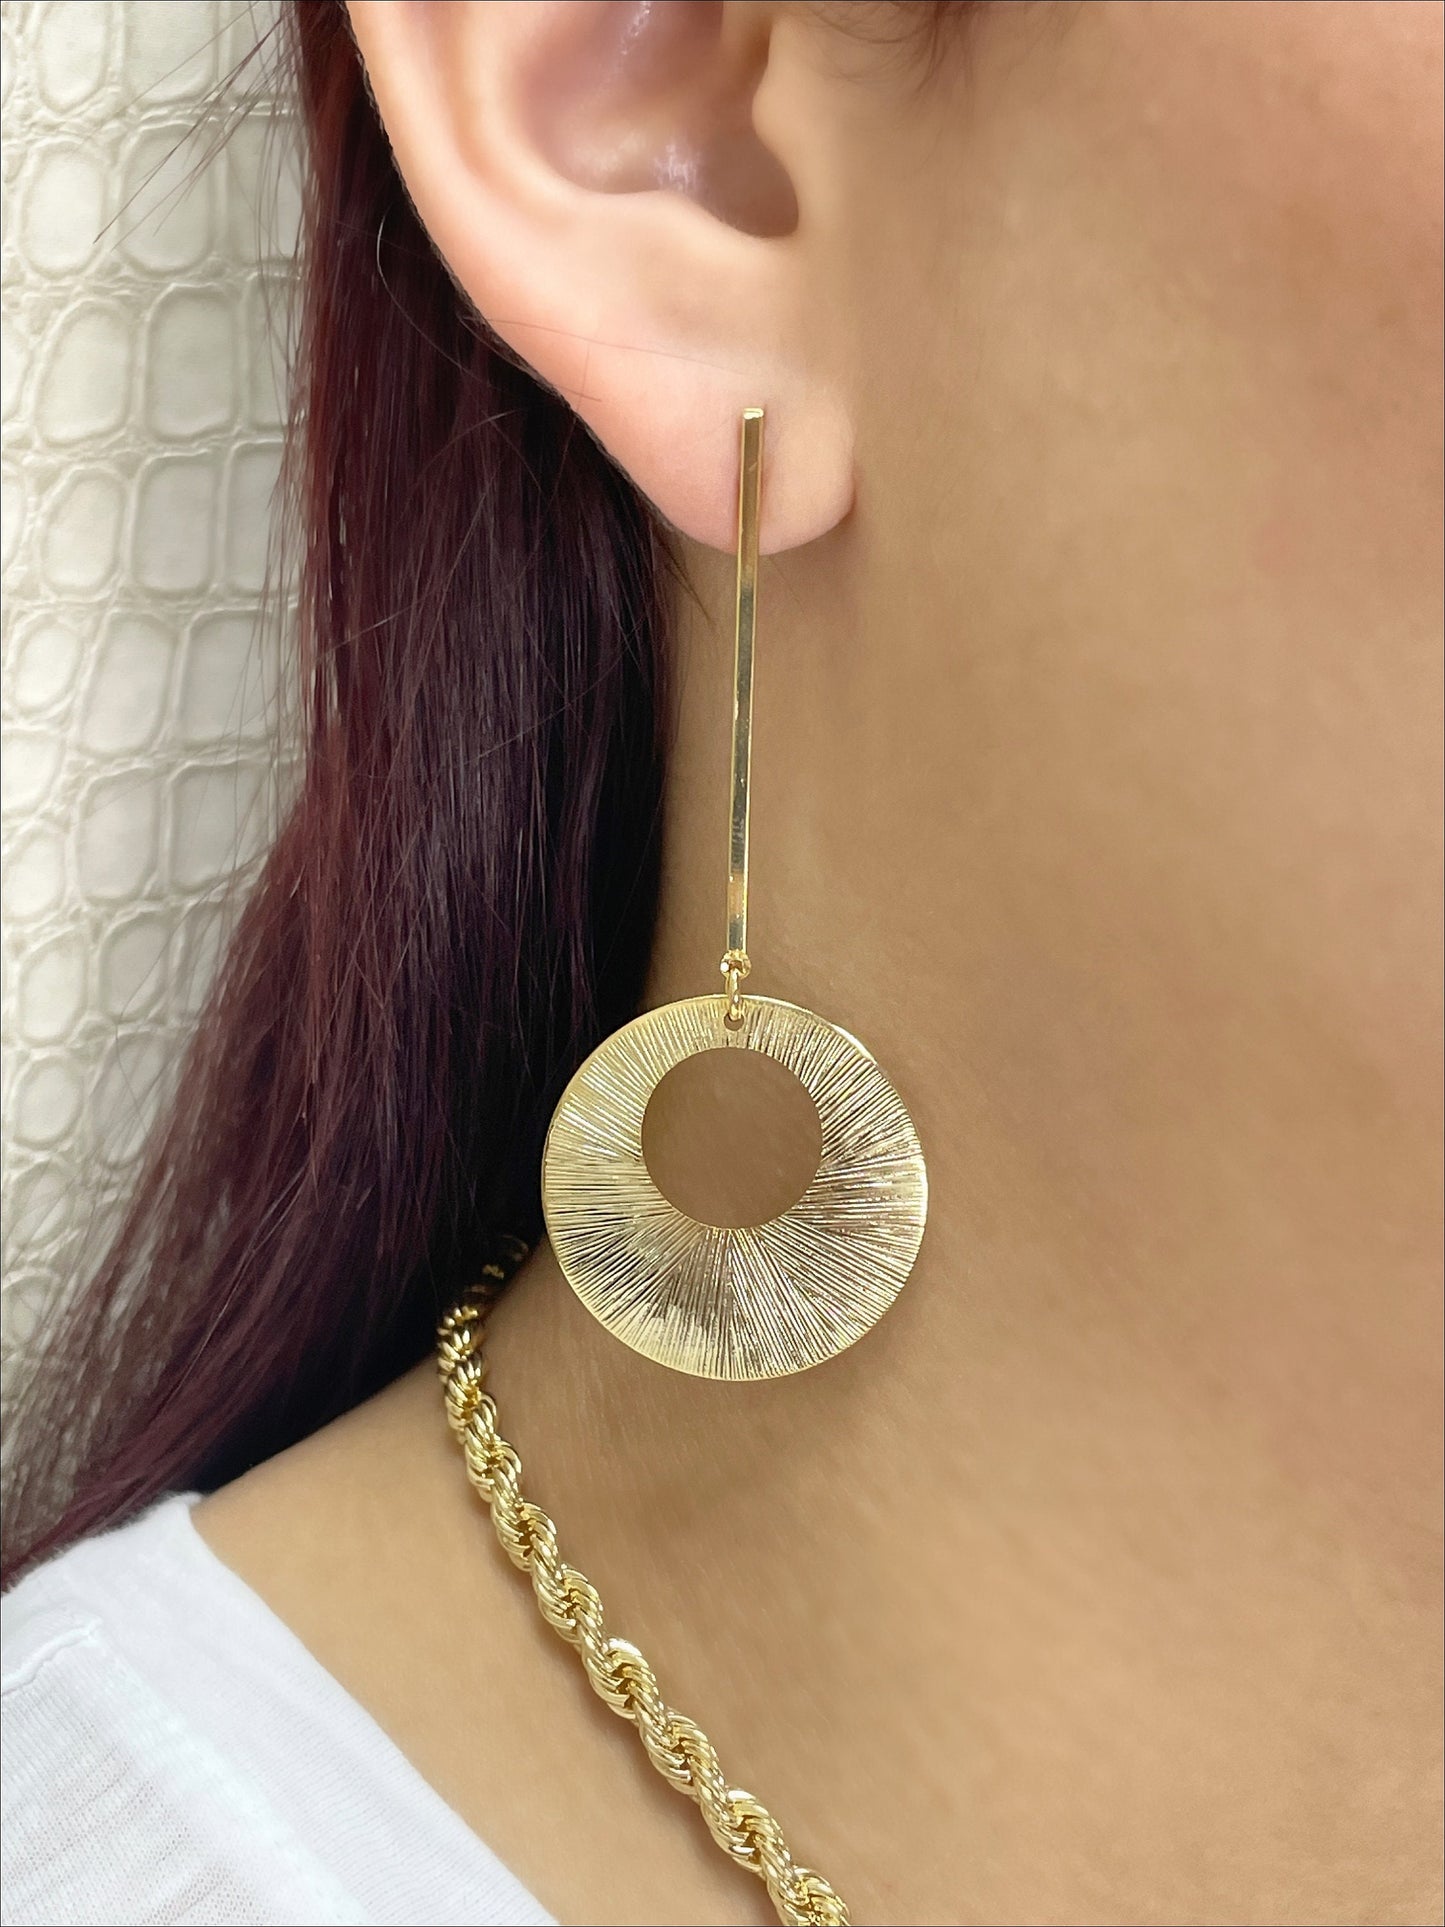 18k Gold Filled Long Drop Earrings with Texturized Cutout Circle, Minimalist Jewelry, Wholesale Jewelry Making Supplies